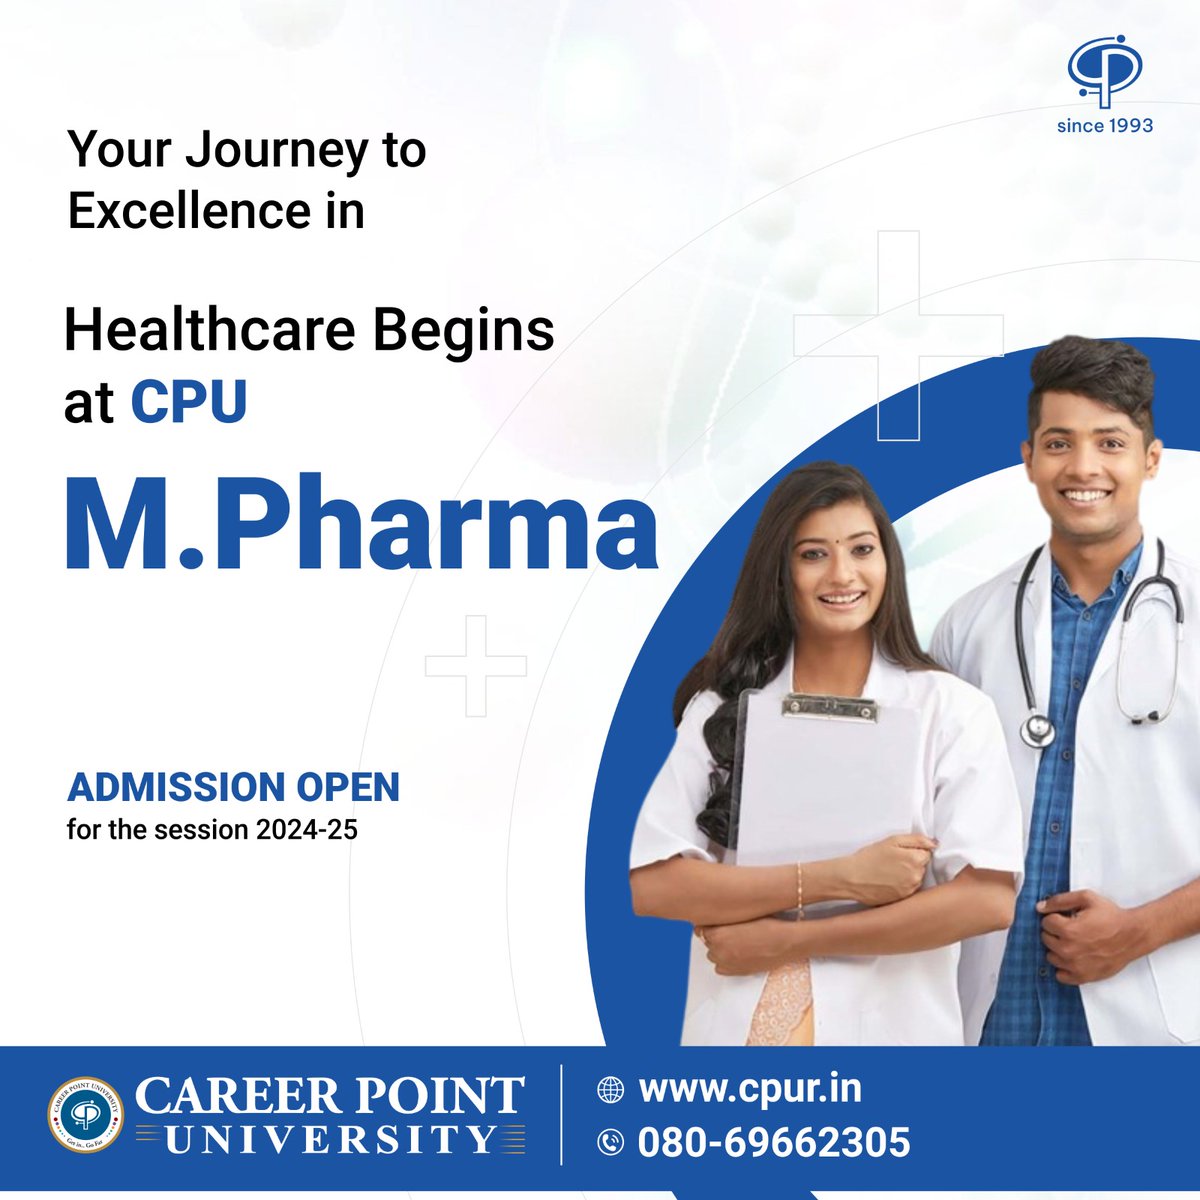 🎓 Enroll in our M.Pharma Program and take the first step towards a rewarding career in healthcare. 👩‍🔬

🎓📞 For inquiries, call us at 080-69662305.
👉🏻 Visit our website: shorturl.at/gOS26

#CareerPointUniversity #MPharma #HealthcareEducation  #FuturePharmacists #ApplyNow